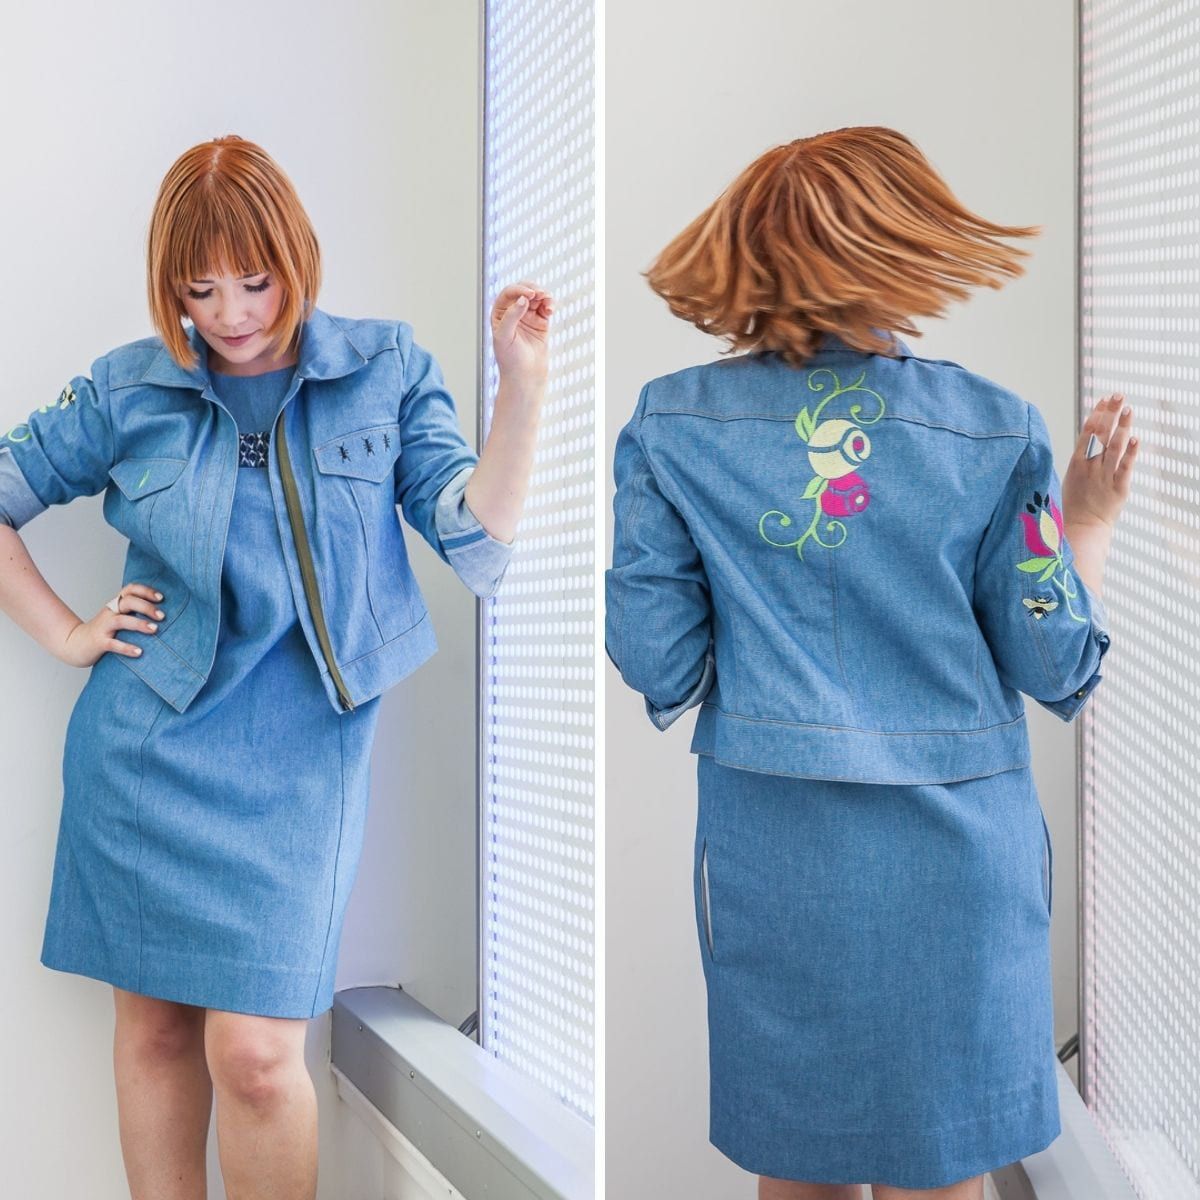 Sew Along and Make Your Own Denim Jacket - Sew Daily